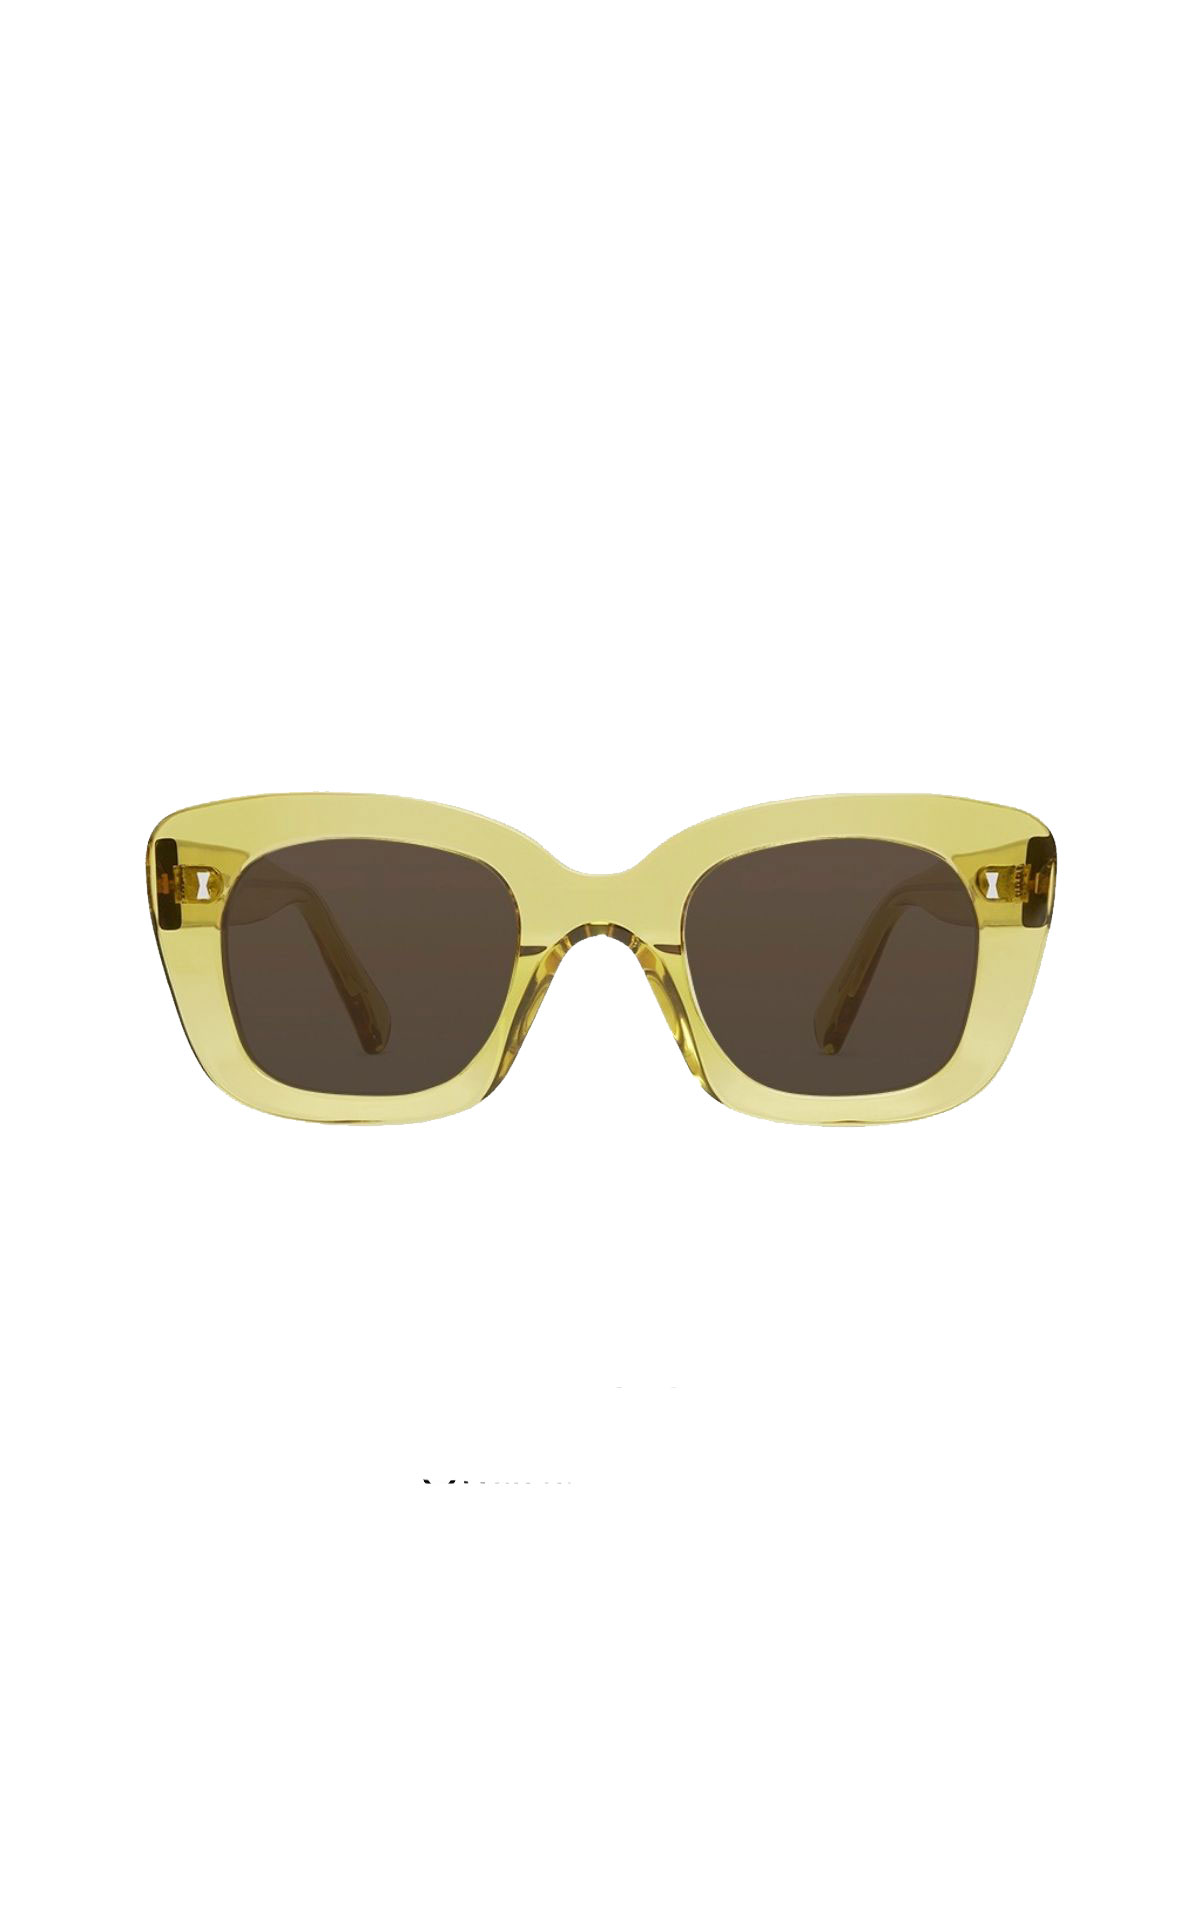 Creative Spot x BFC Cubitts Boswell sunglasses from Bicester Village